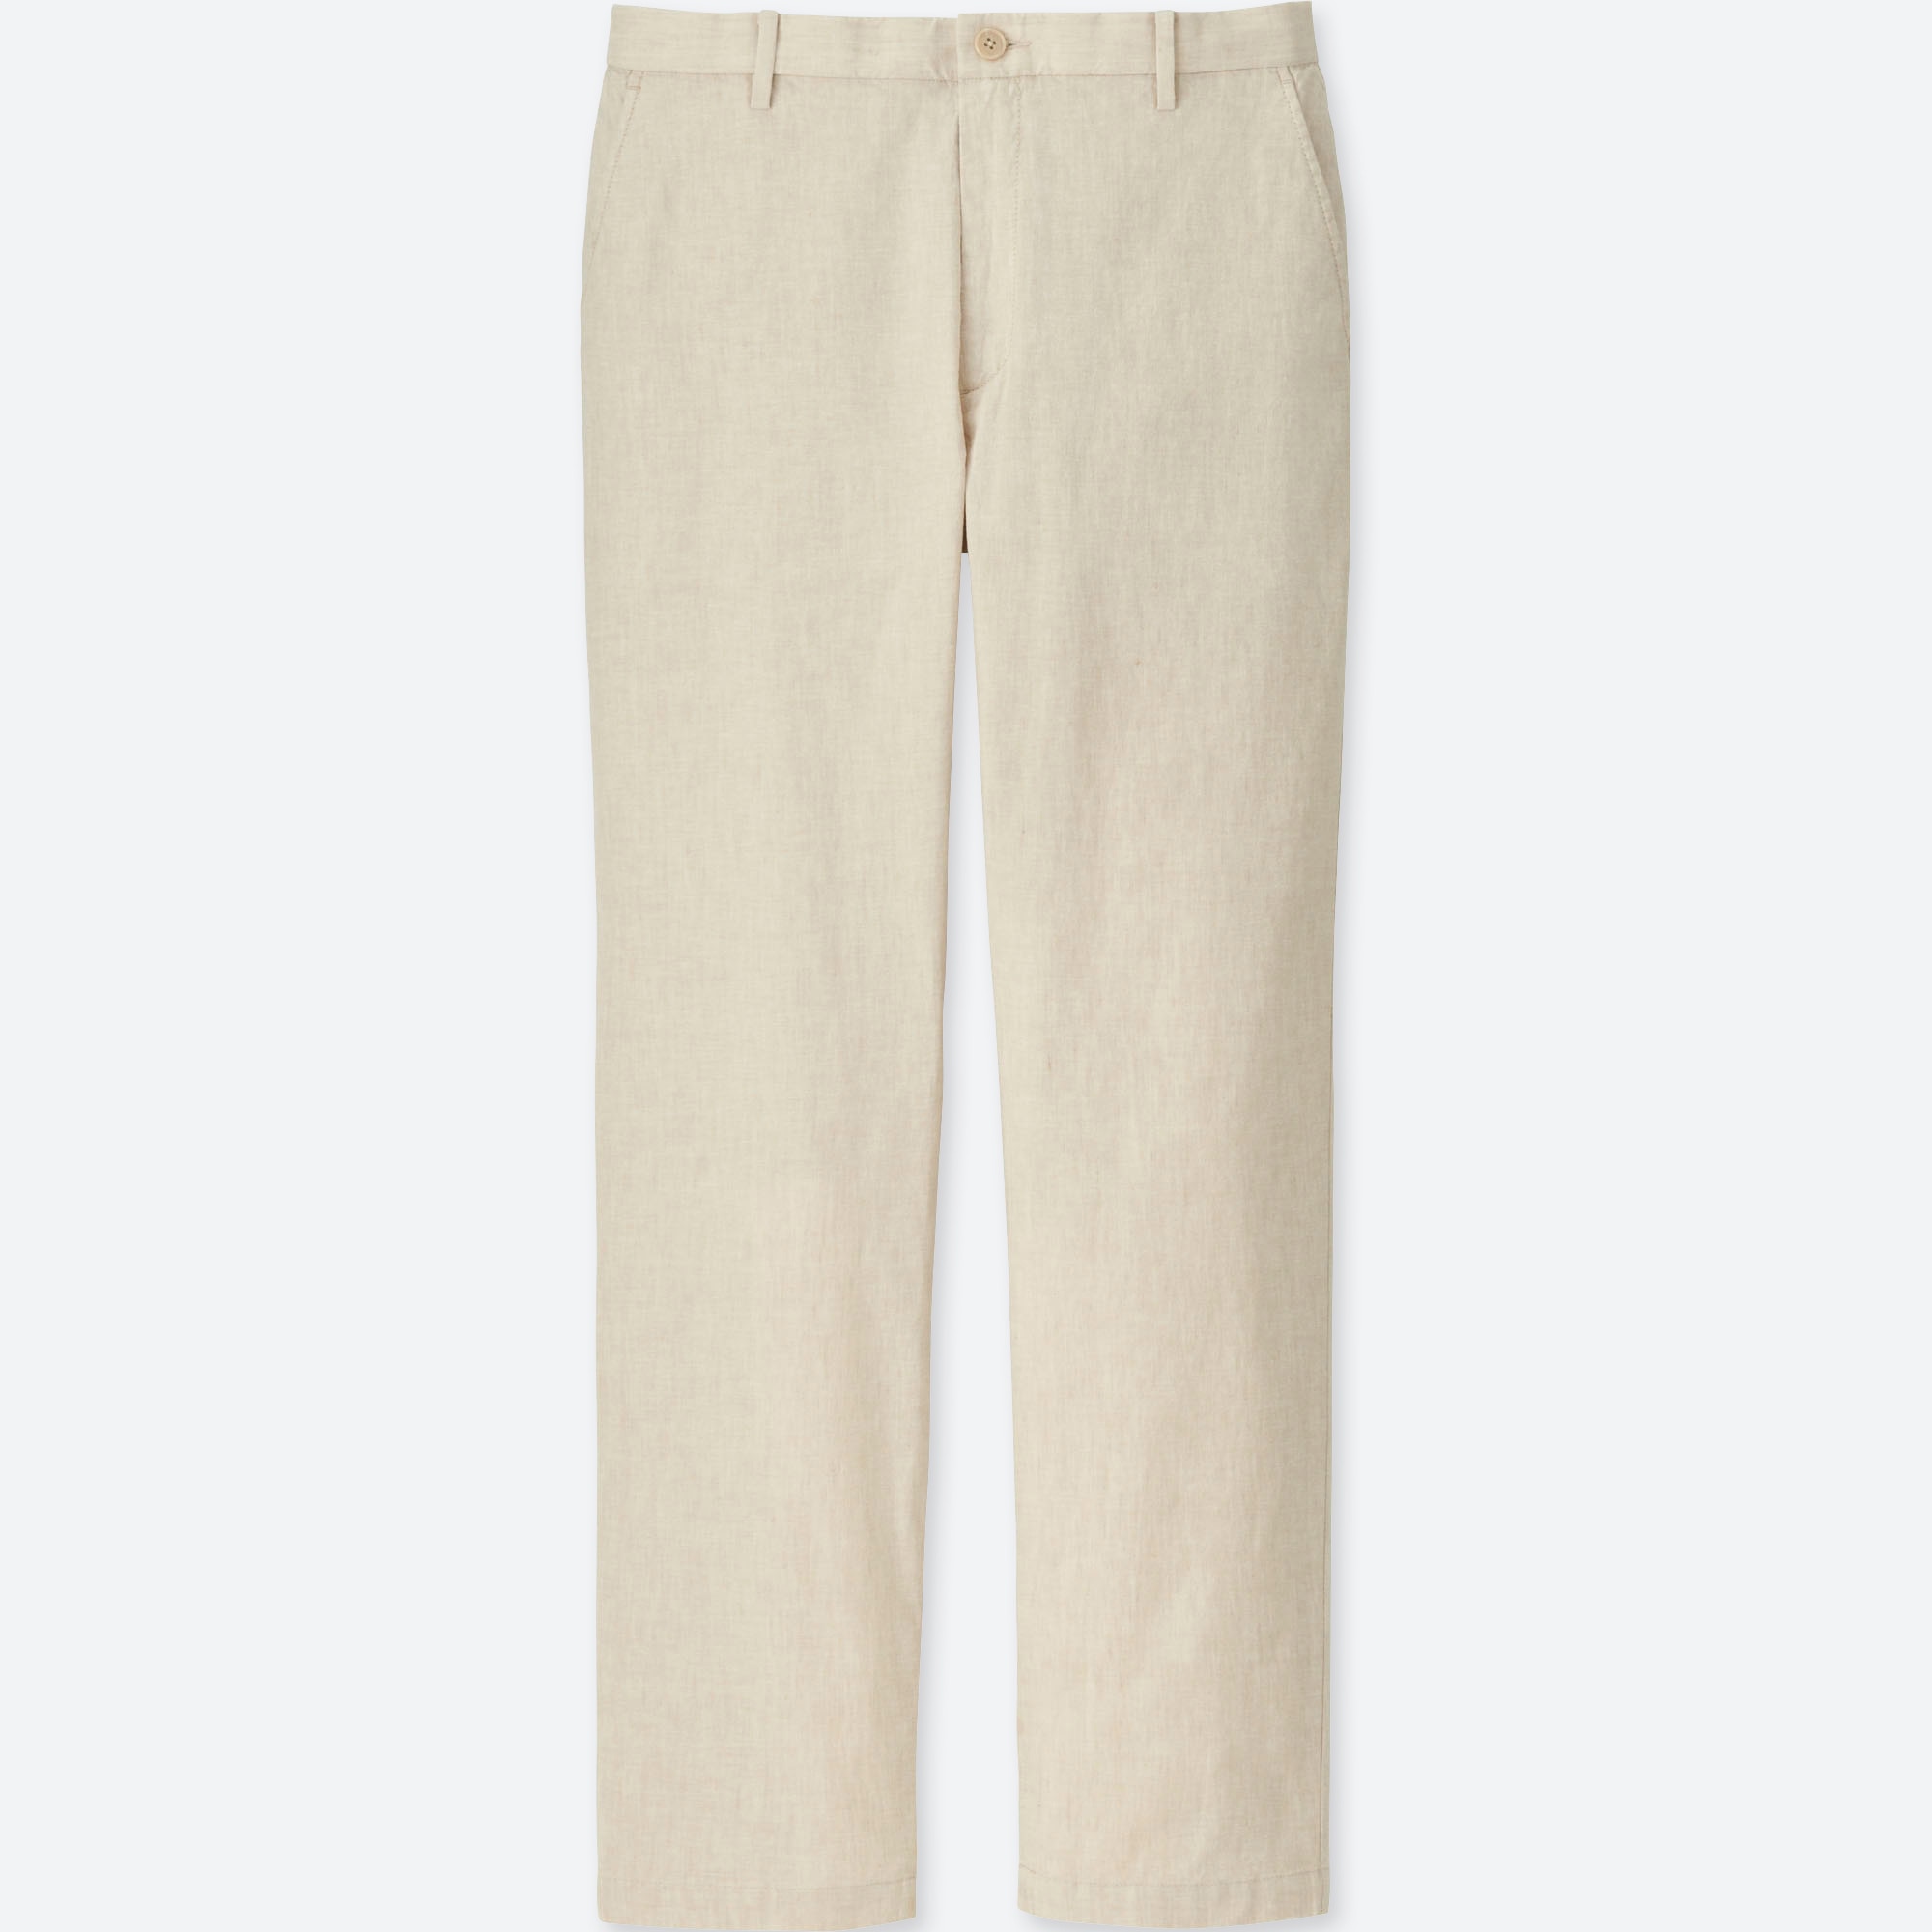 Men's Tall Pants and Bottoms | Lands' End